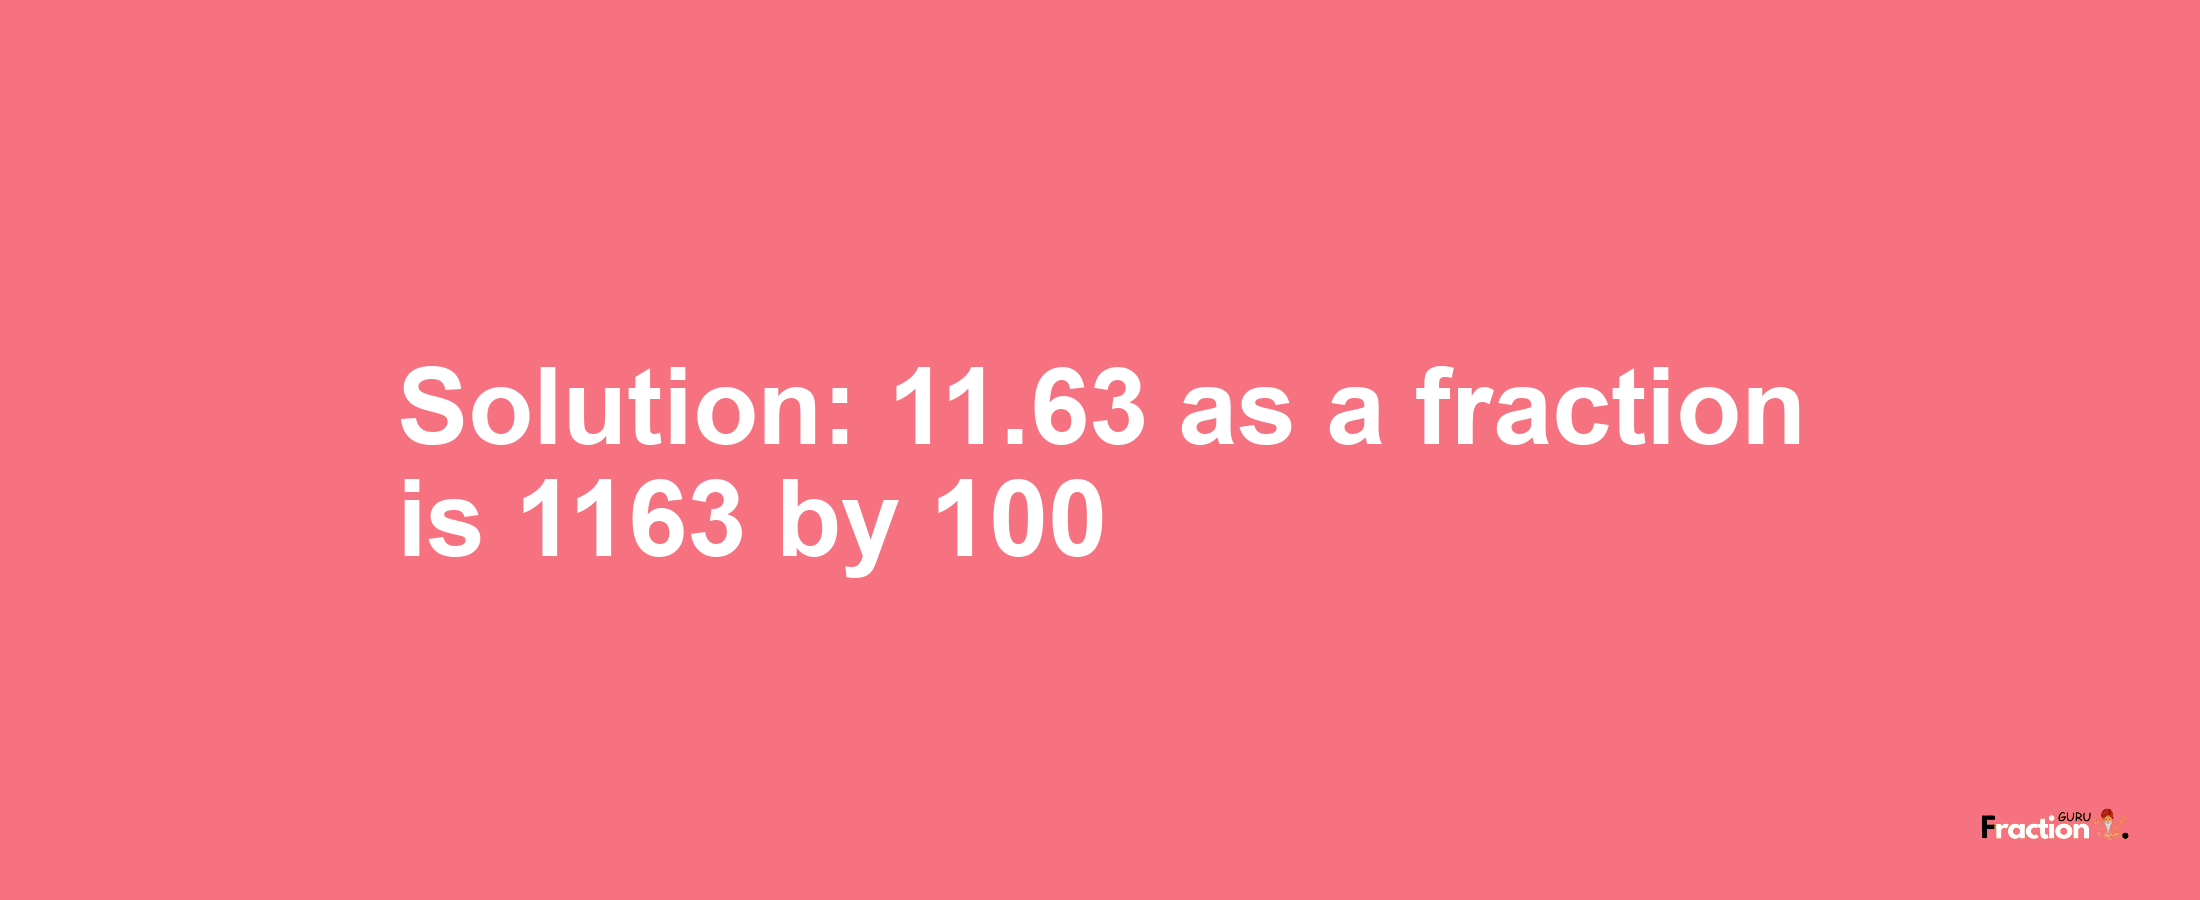 Solution:11.63 as a fraction is 1163/100